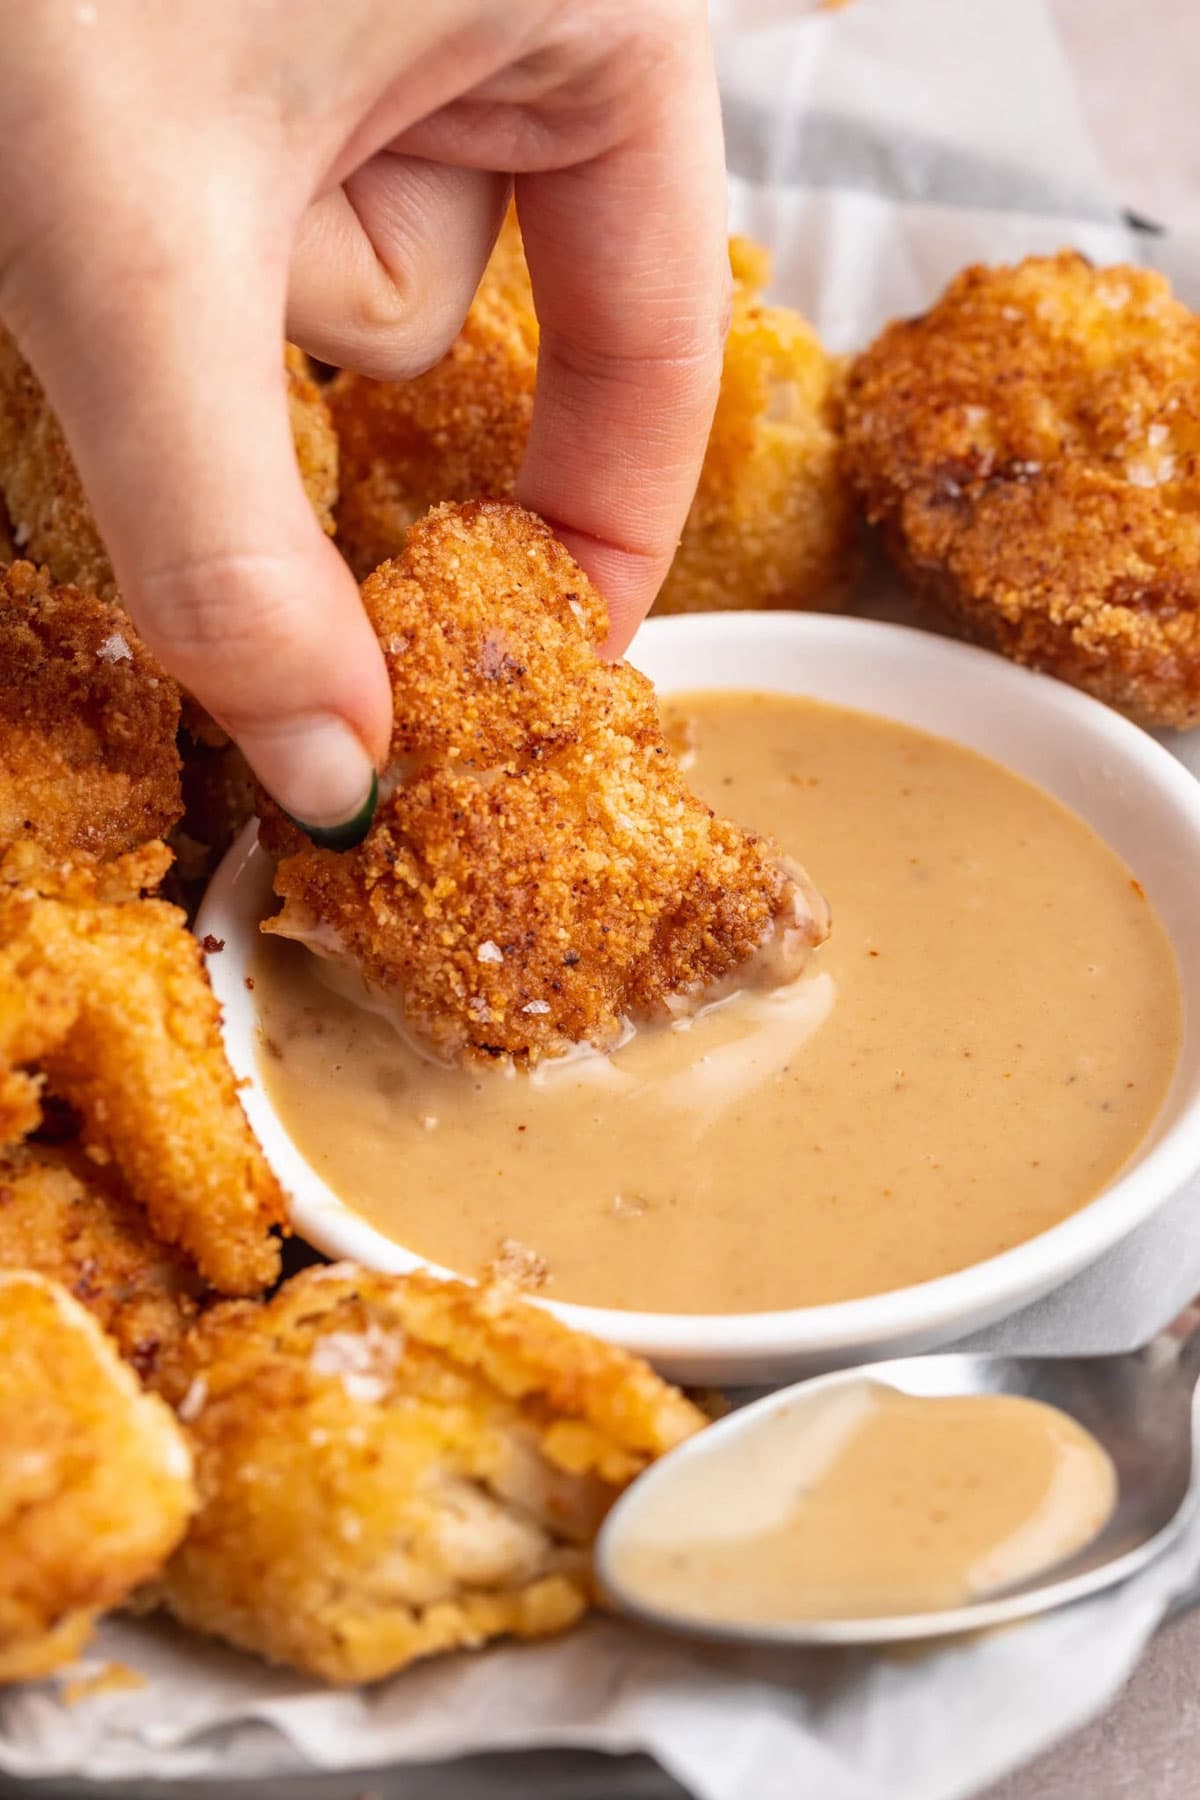 A white woman's hand dipping a breaded keto chicken chunk into a bowl of keto honey mustard sauce.